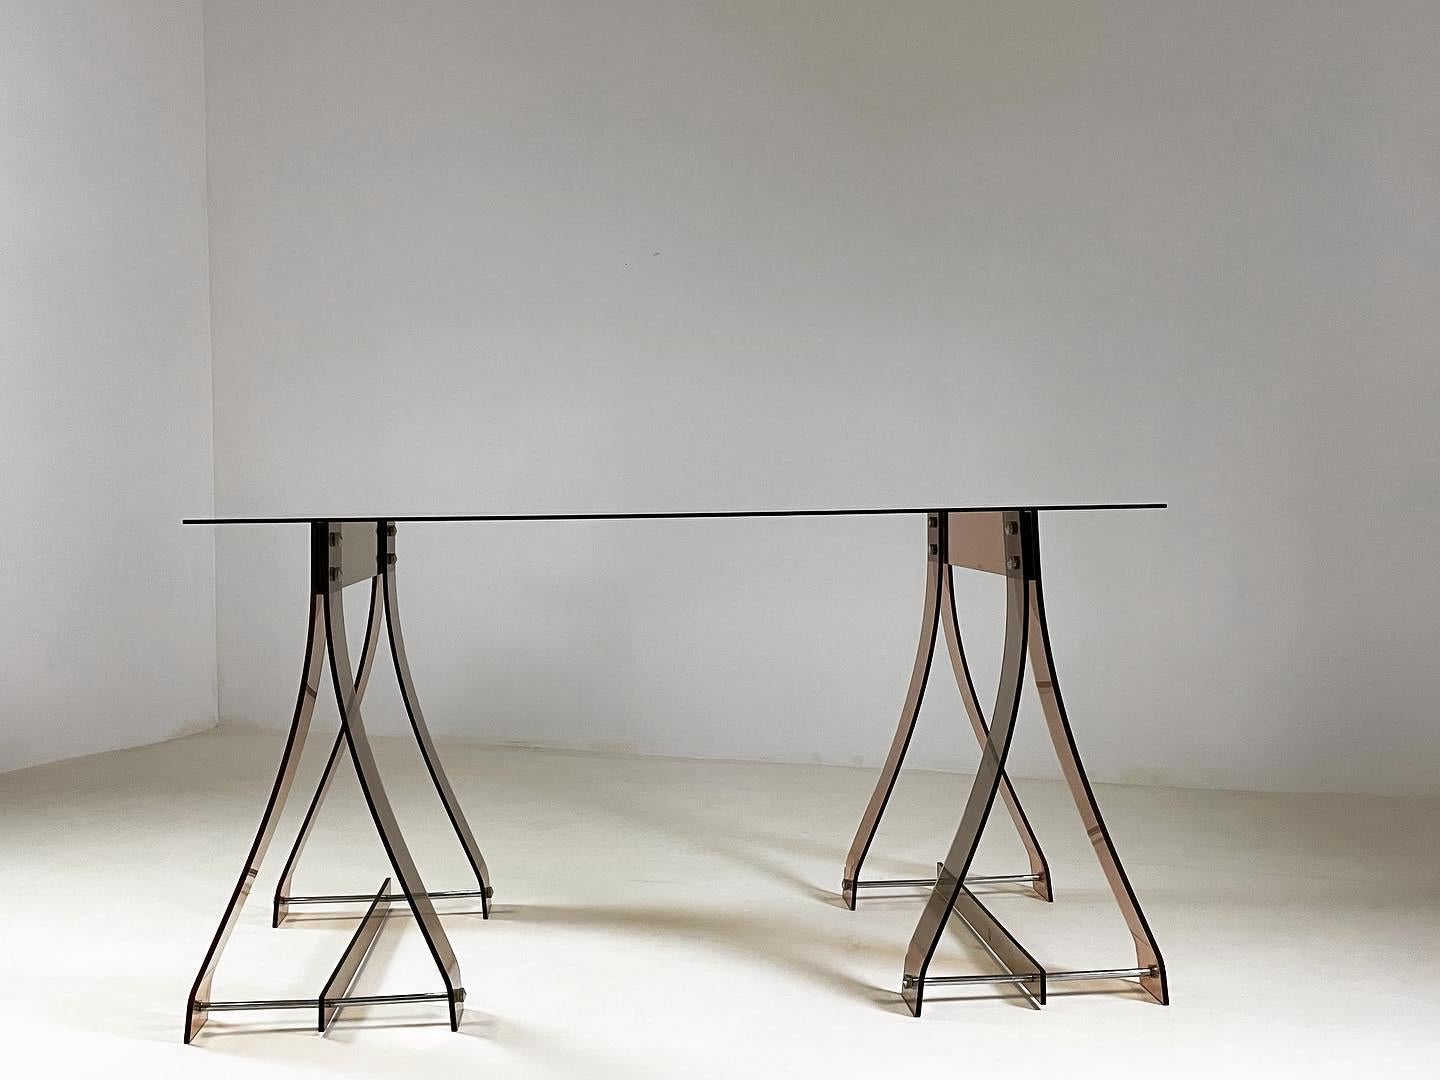 Vintage desk by Marcello Gacita and Pierre Tiberi and edited by Mode Europe in the 70s.
A smoked glass top (5mm) is placed on a pair of Plexiglas trestles.
Dimensions: L136 x D69 x H73 cm